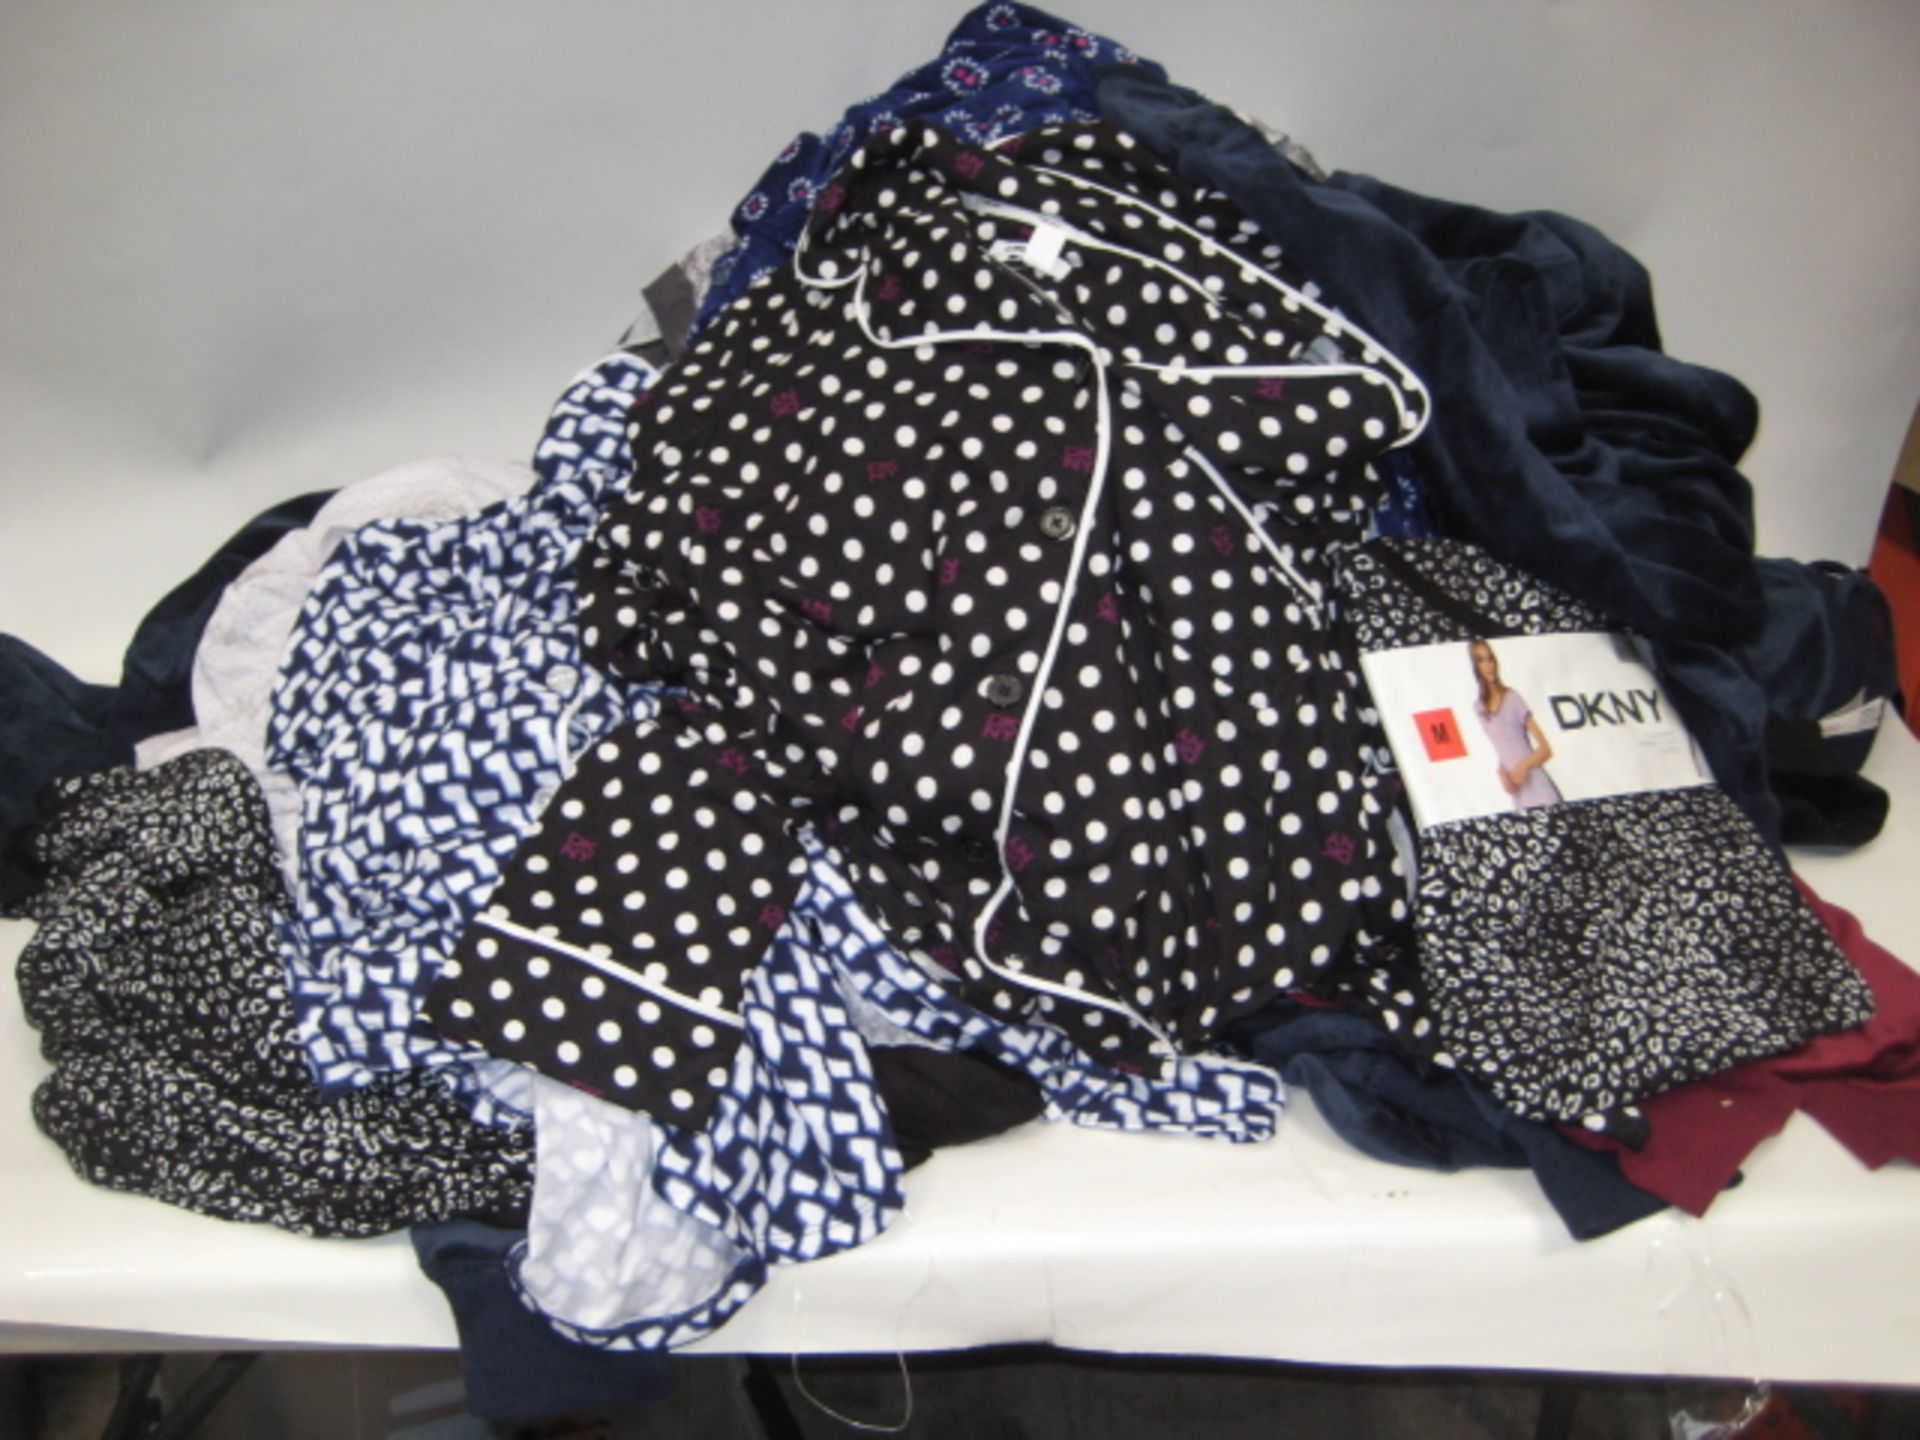 Large bag of ladies lounge wear, Pjs, etc by DKNY, 32 Degree cool, in various colours, polka dot